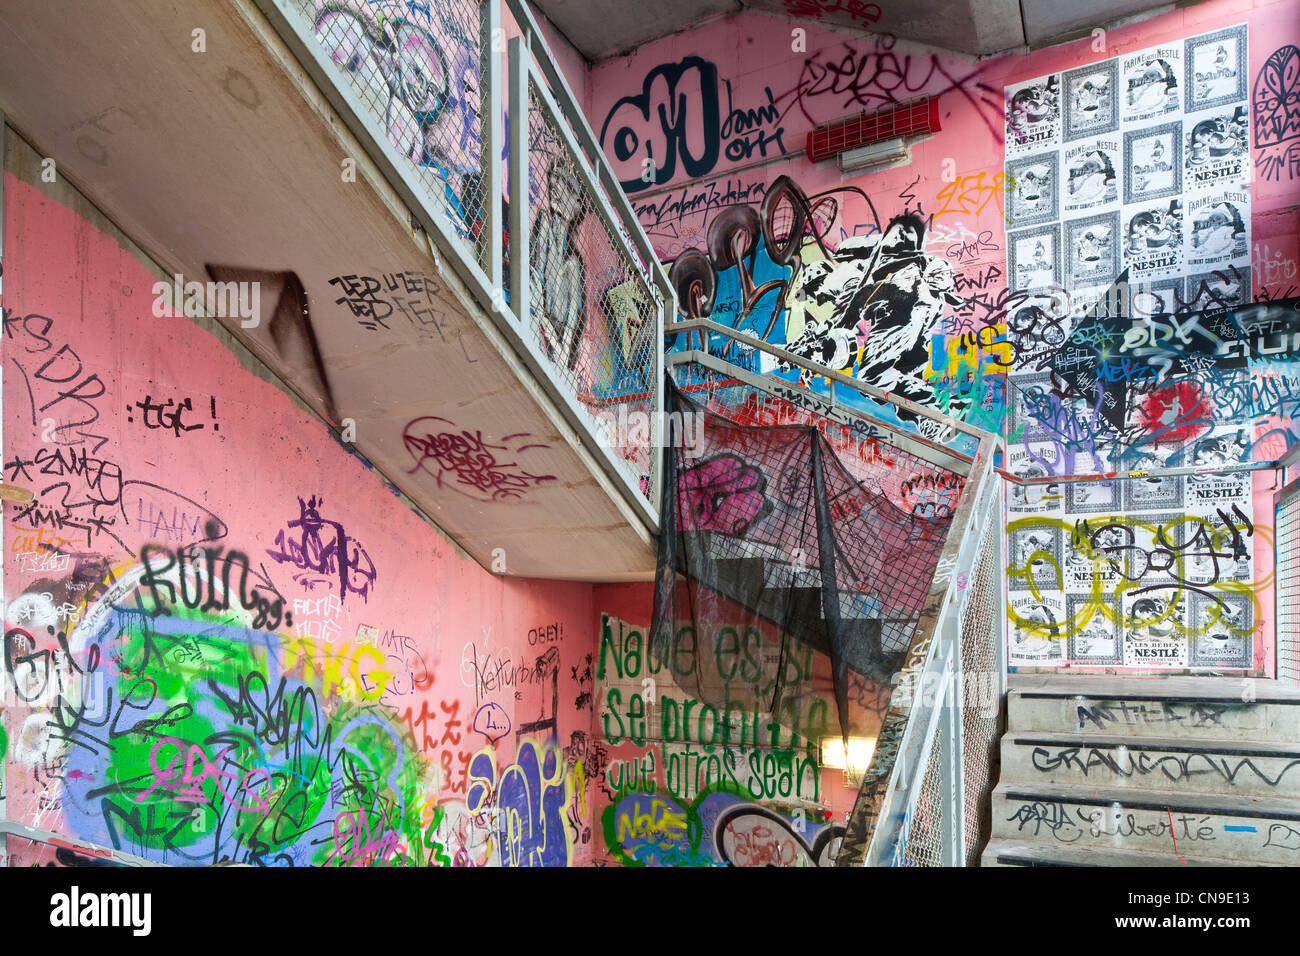 Germany, Berlin, Mitte, Oranienburger strasse, Kunsthaus Tacheles, Tacheles, an artist squatting since the 1990's, located in a Stock Photo